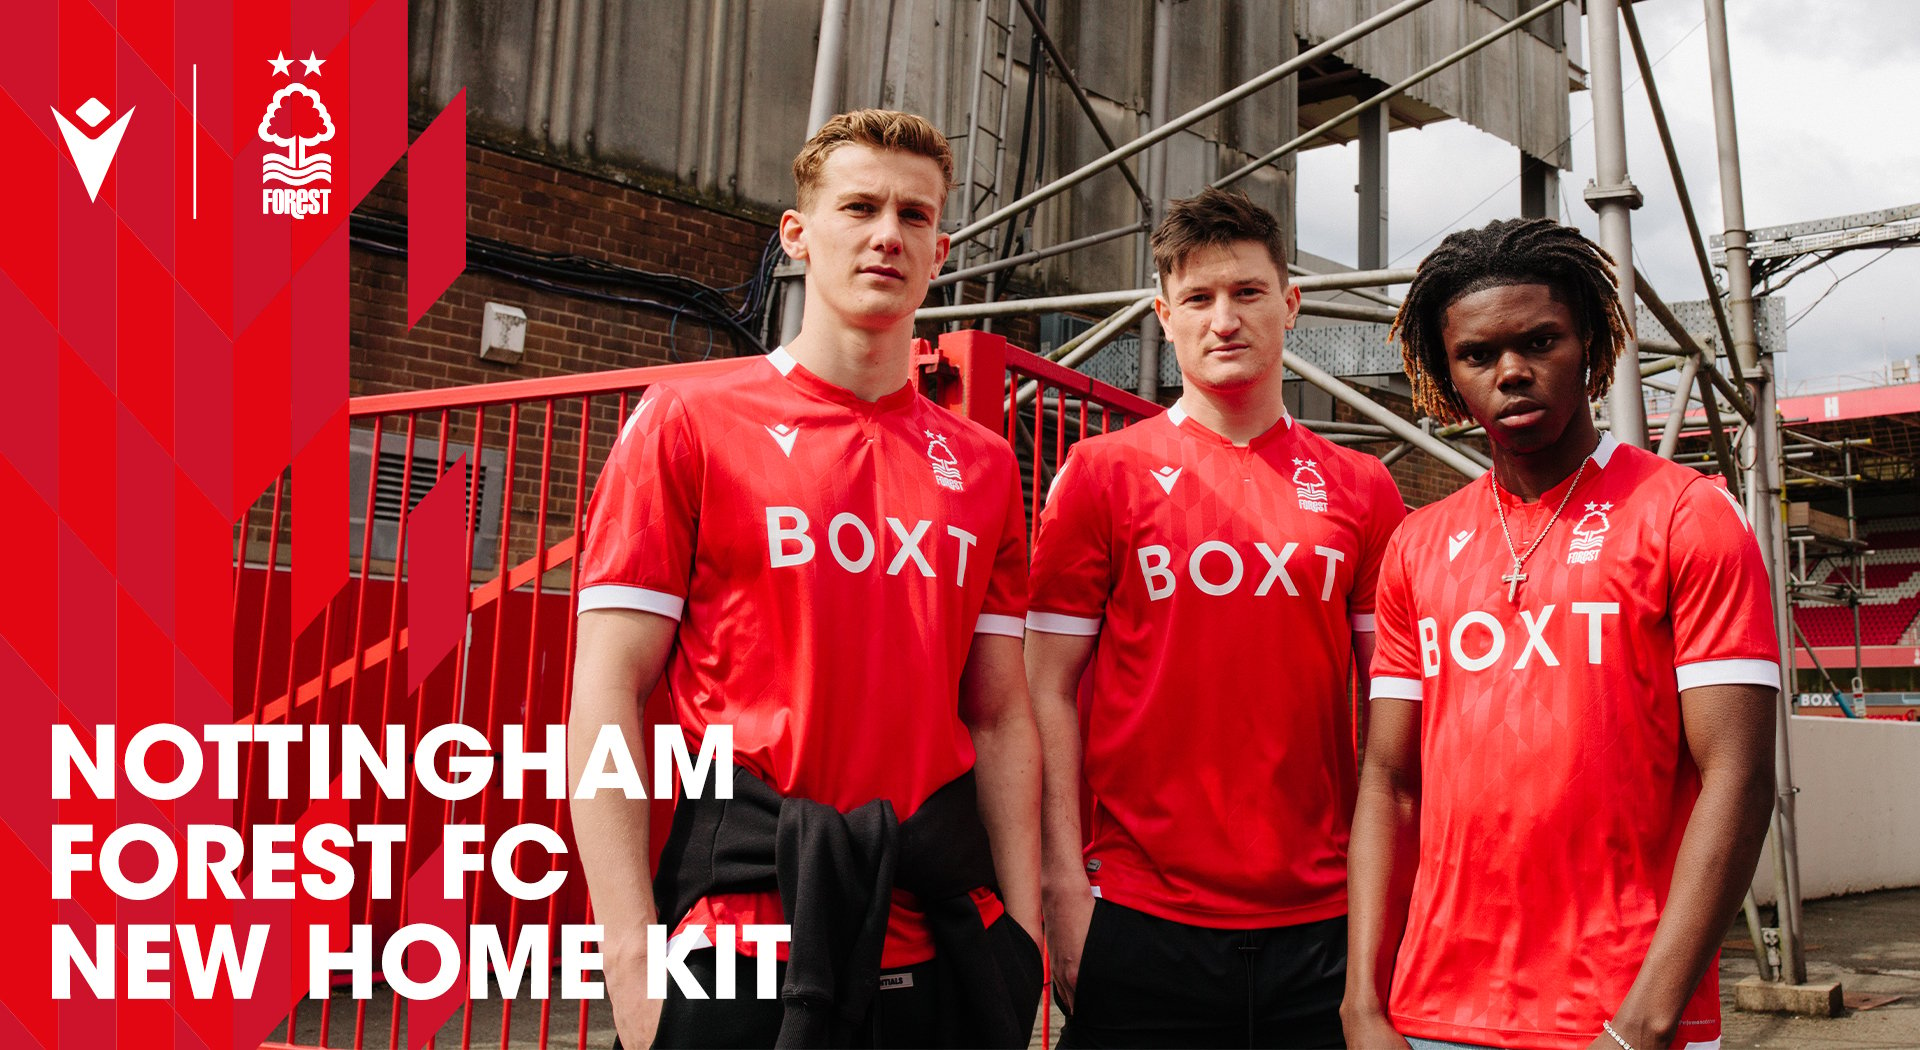 NOTTINGHAM FOREST GETS A NEW HOME JERSEY IN GARIBALDI RED WITH THE COME ON  YOU REDS CHANT